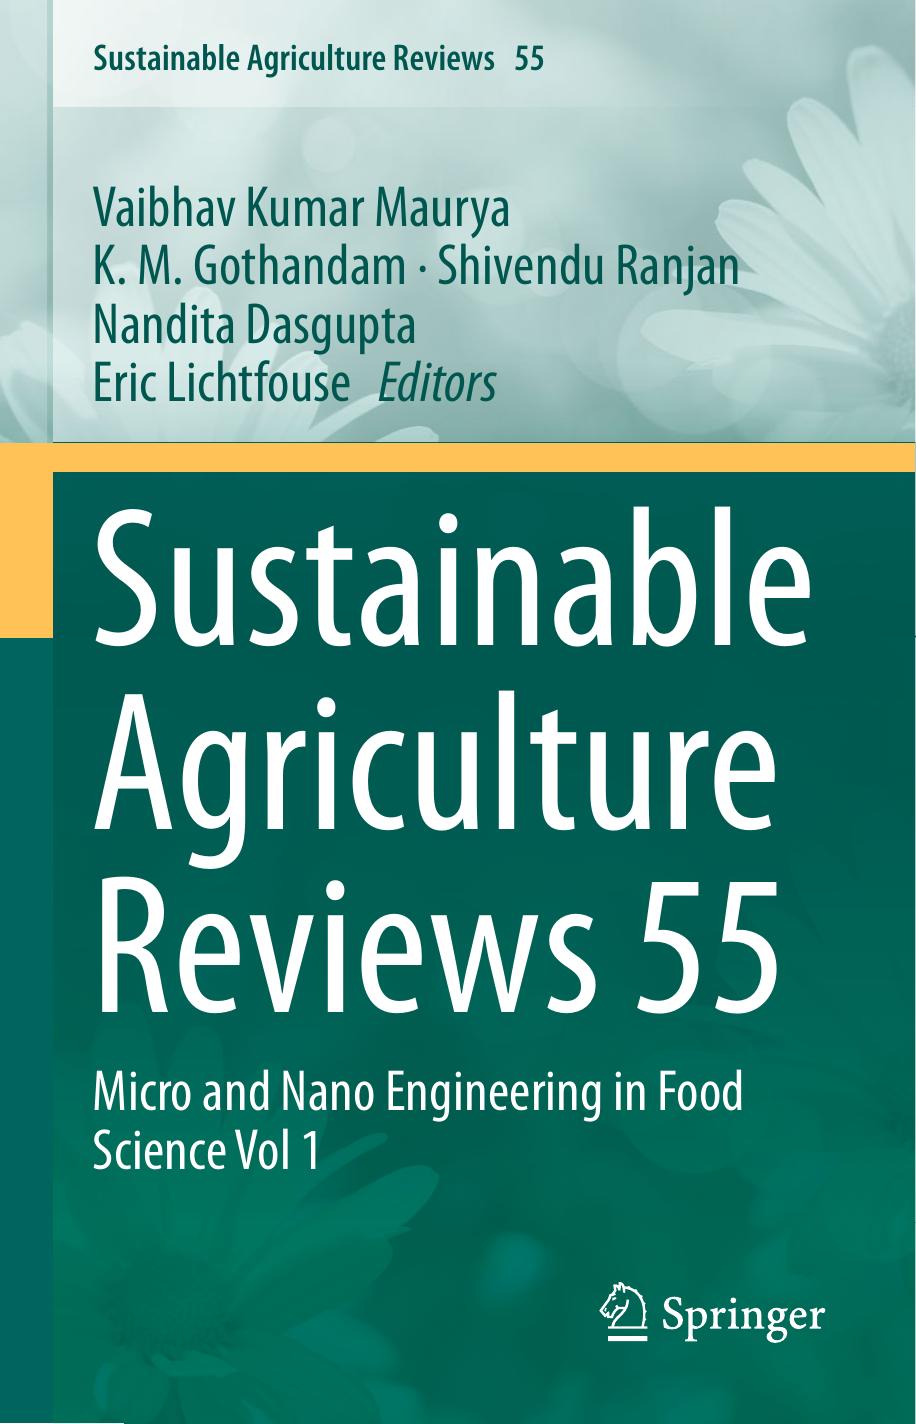 Sustainable Agriculture Reviews 55  Micro and Nano Engineering in Food Science Vol 1-Springer (2021)